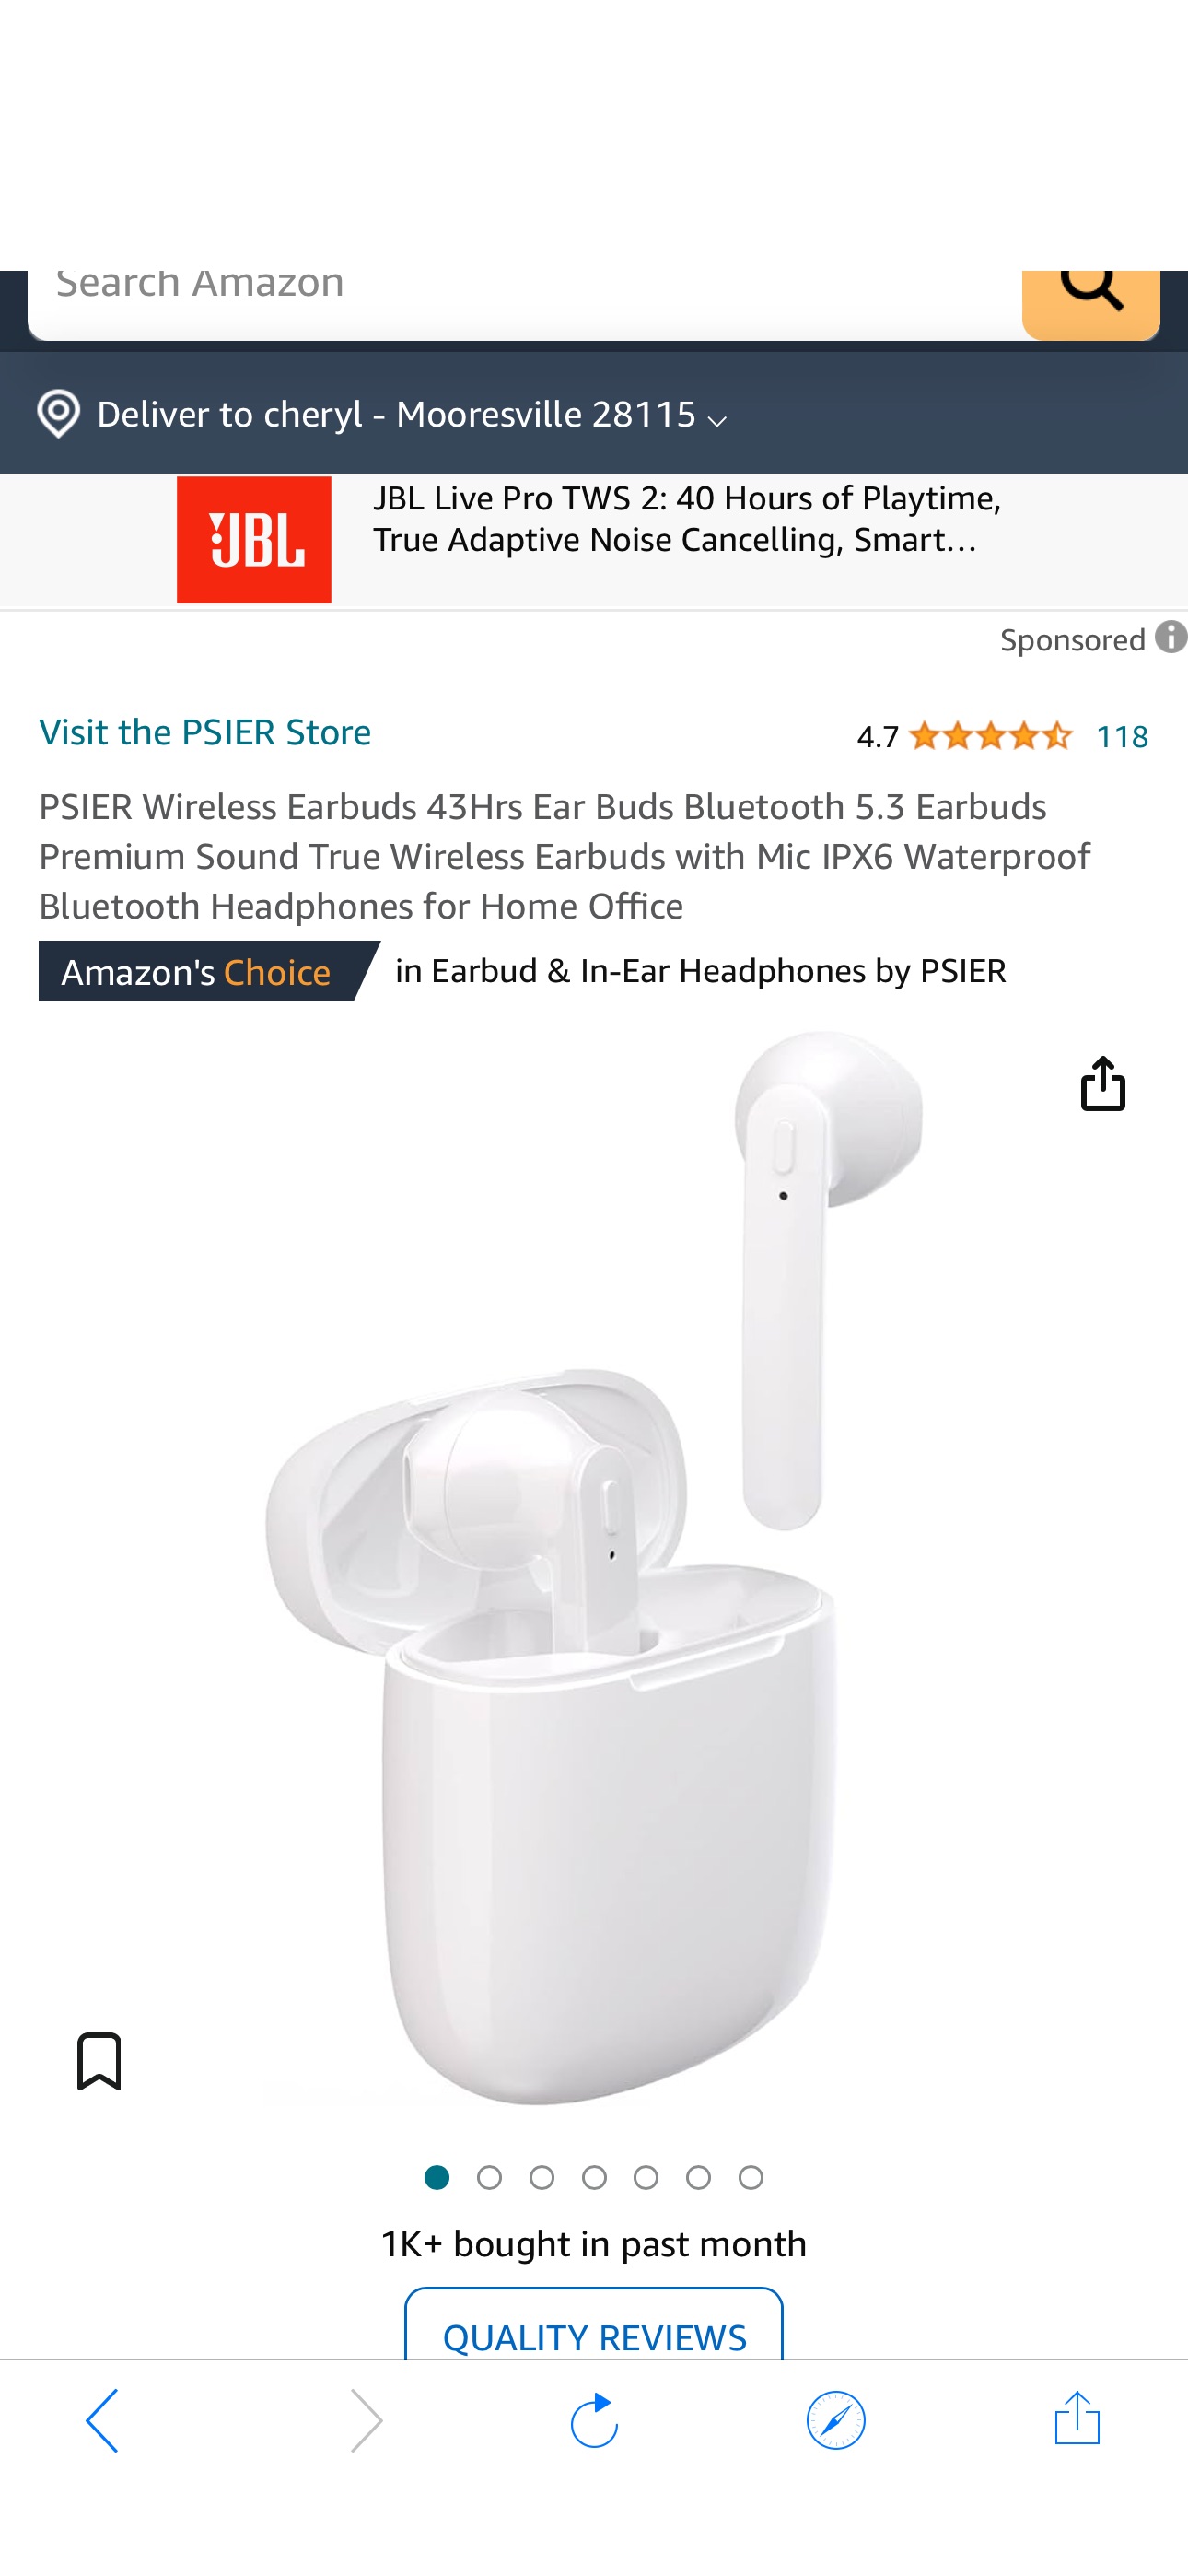 Amazon.com: PSIER Wireless Earbuds 43Hrs Ear Buds Bluetooth 5.3 Earbuds Premium Sound True Wireless Earbuds with Mic IPX6 Waterproof Bluetooth Headphones for Home Office : Electronics